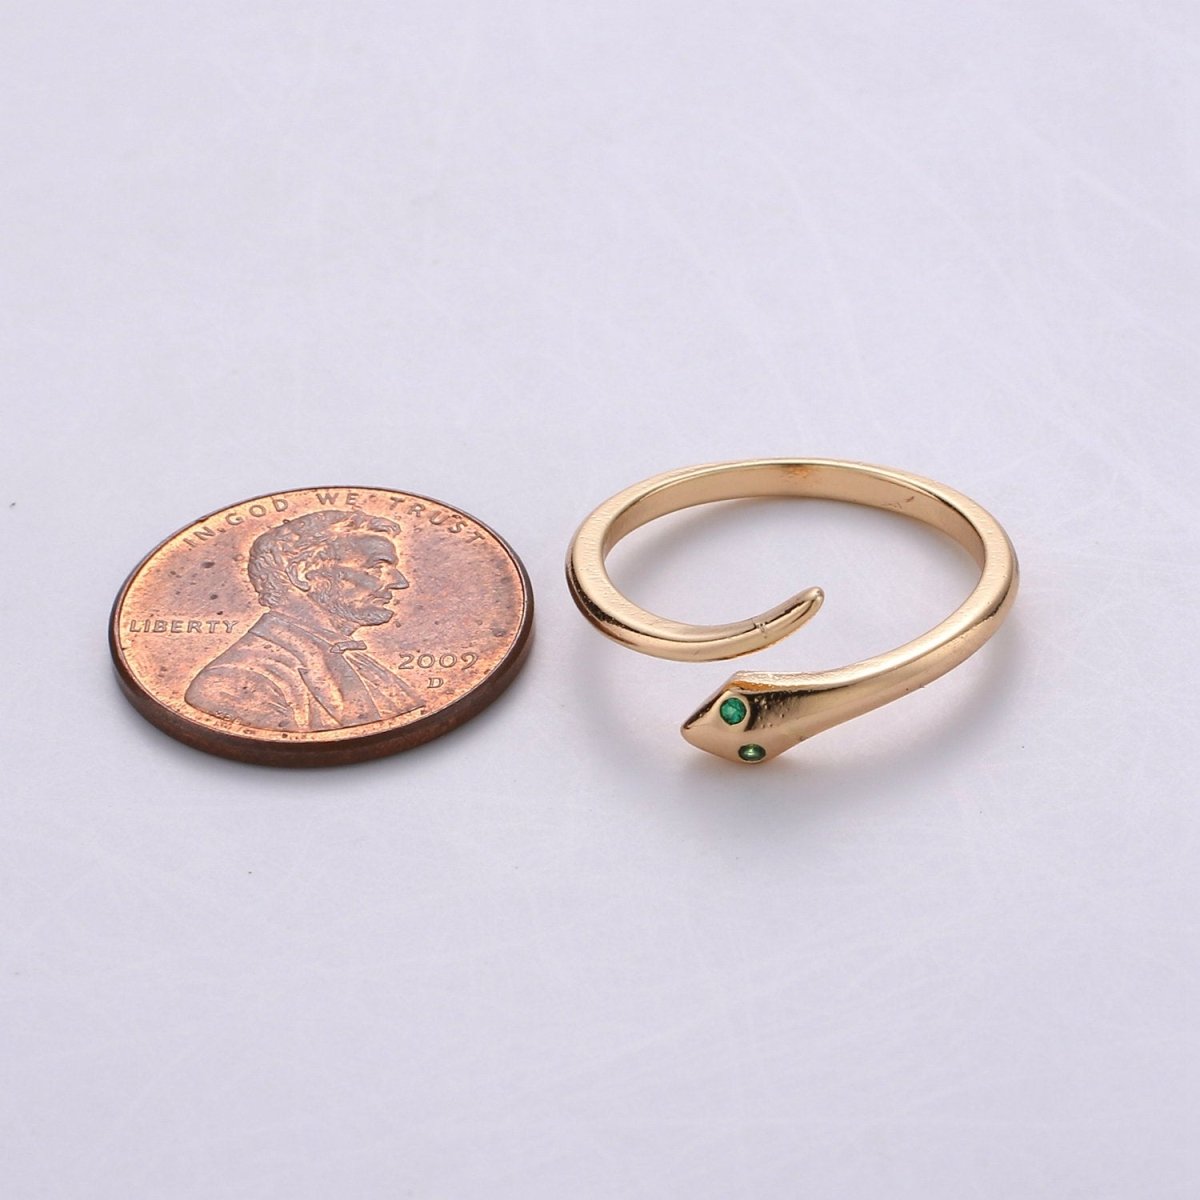 Snake Ring - Serpent Ring - Stackable Gold Ring - Minimalist Gold Ring - Thin Ring - Dainty Ring - Tiny Ring -Small Gold Ring -Delicate Ring R-046 - DLUXCA